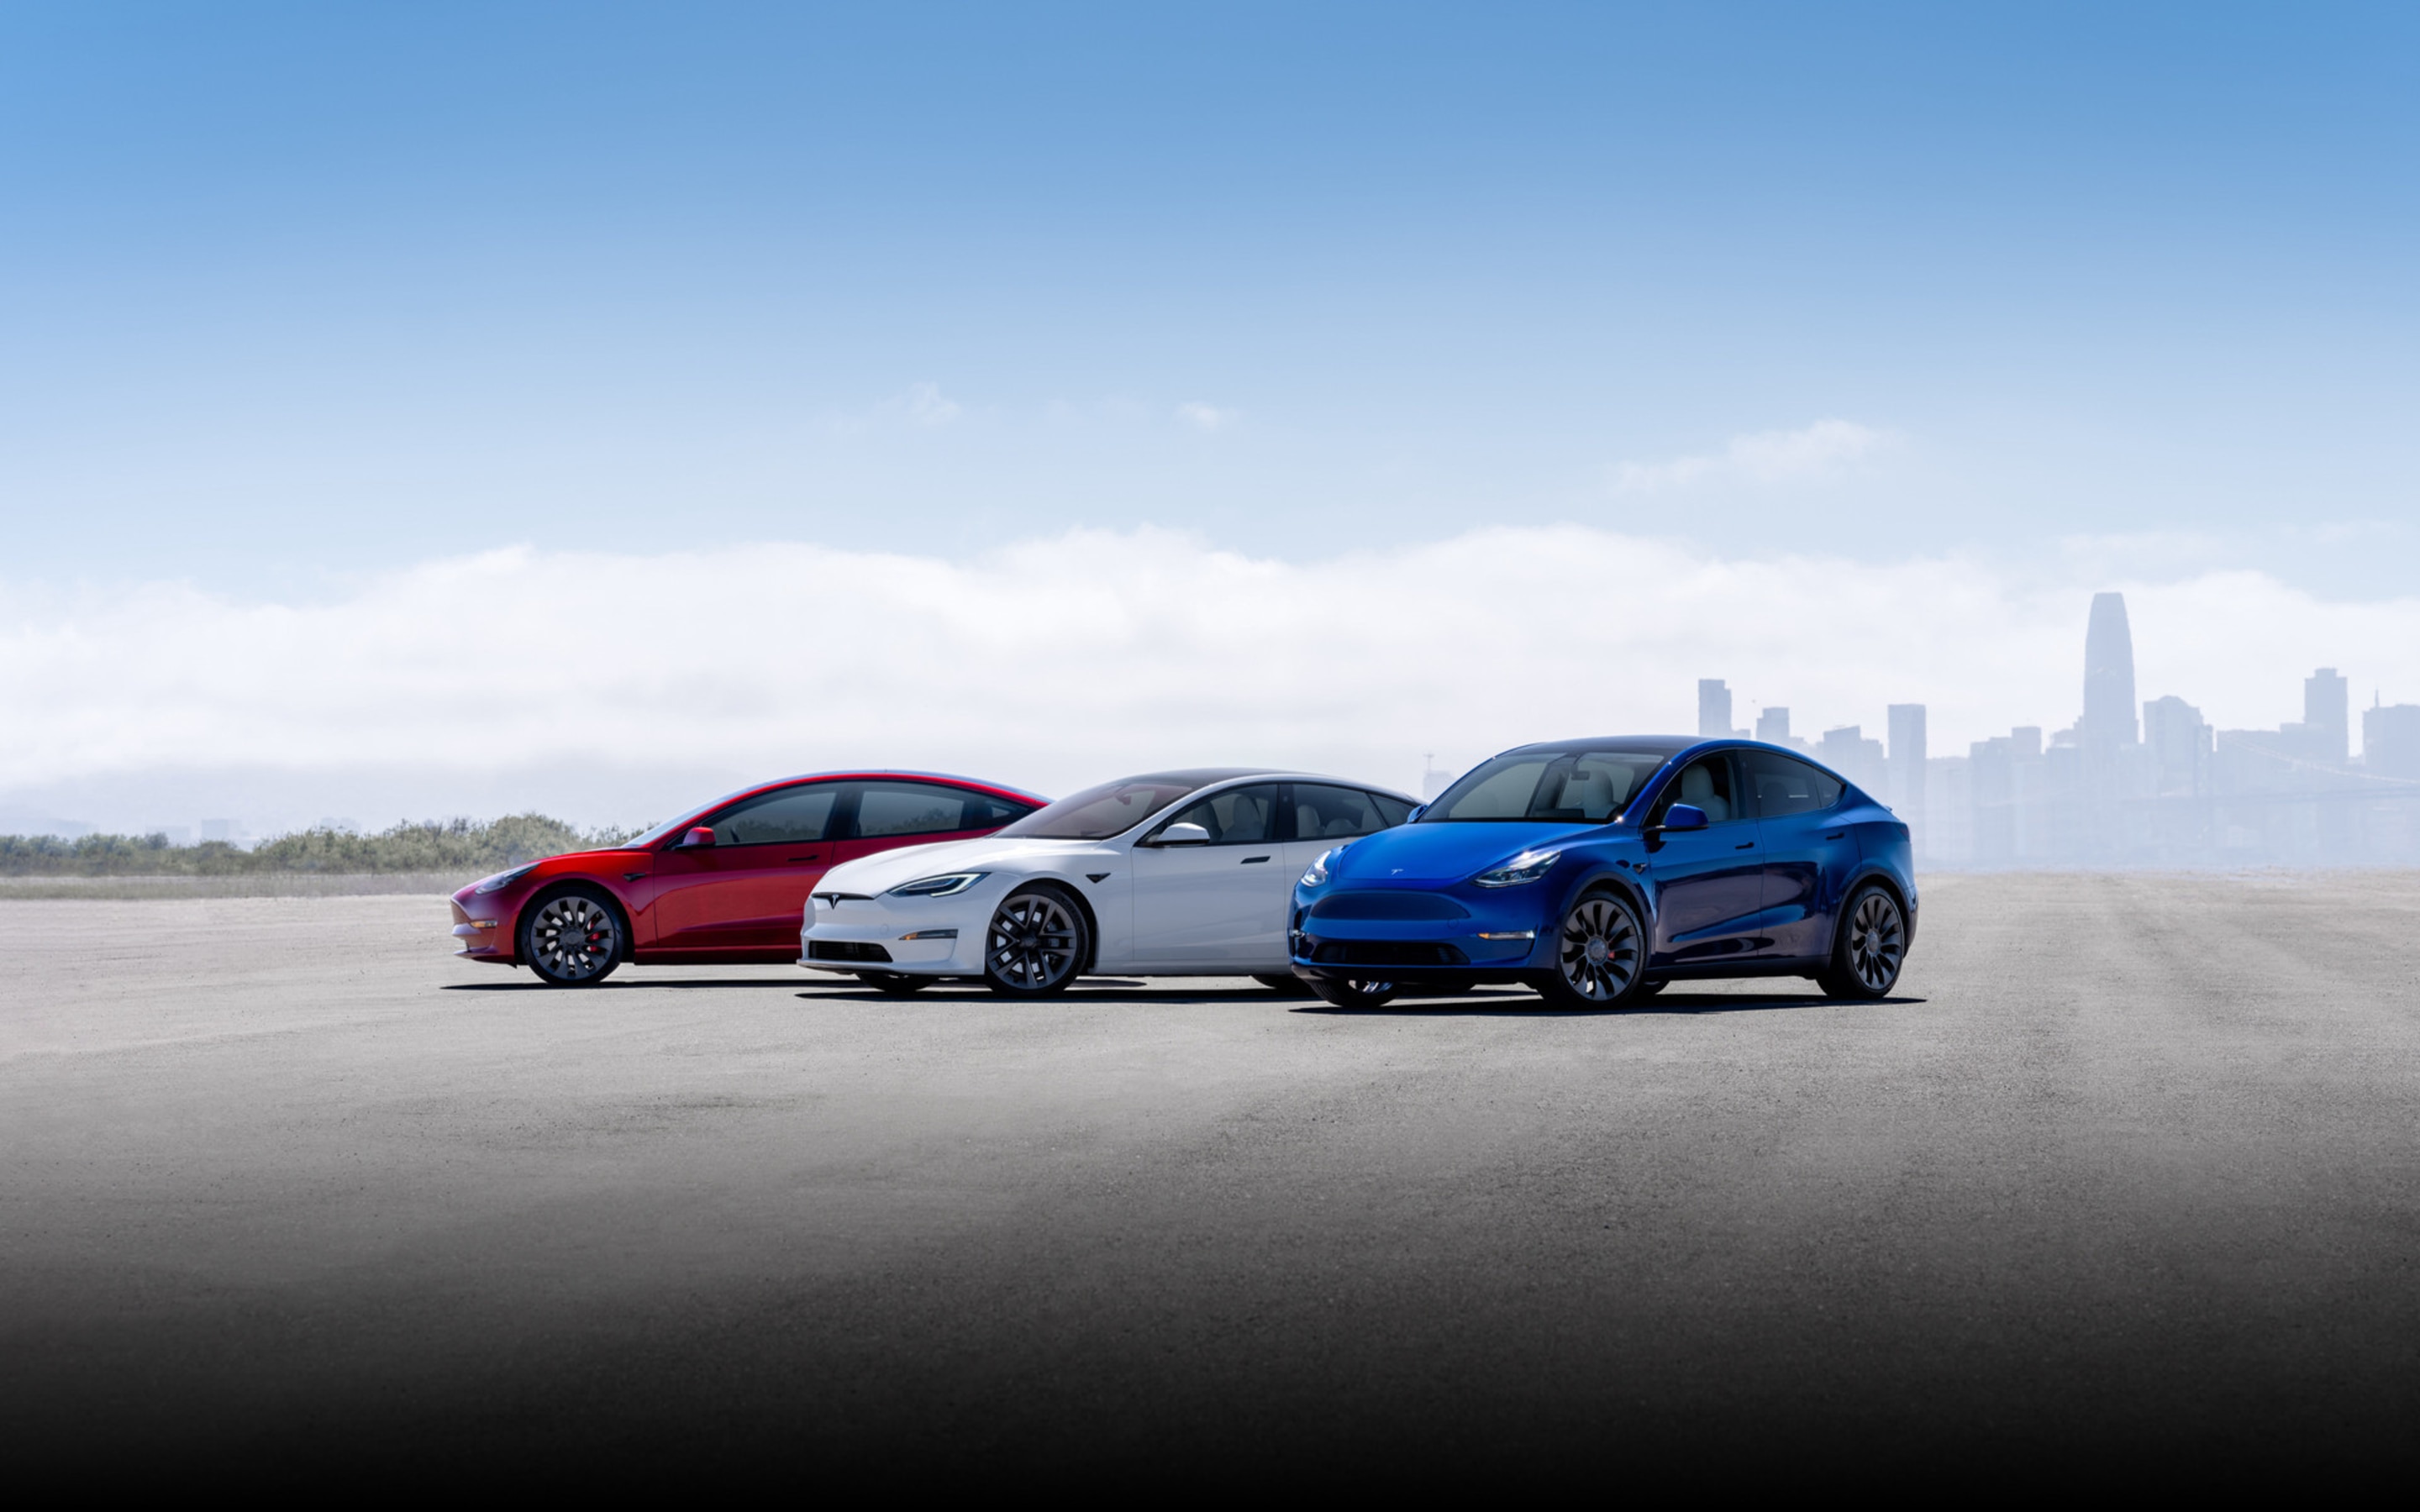 Red Model 3, white Model S and blue Model Y lined up